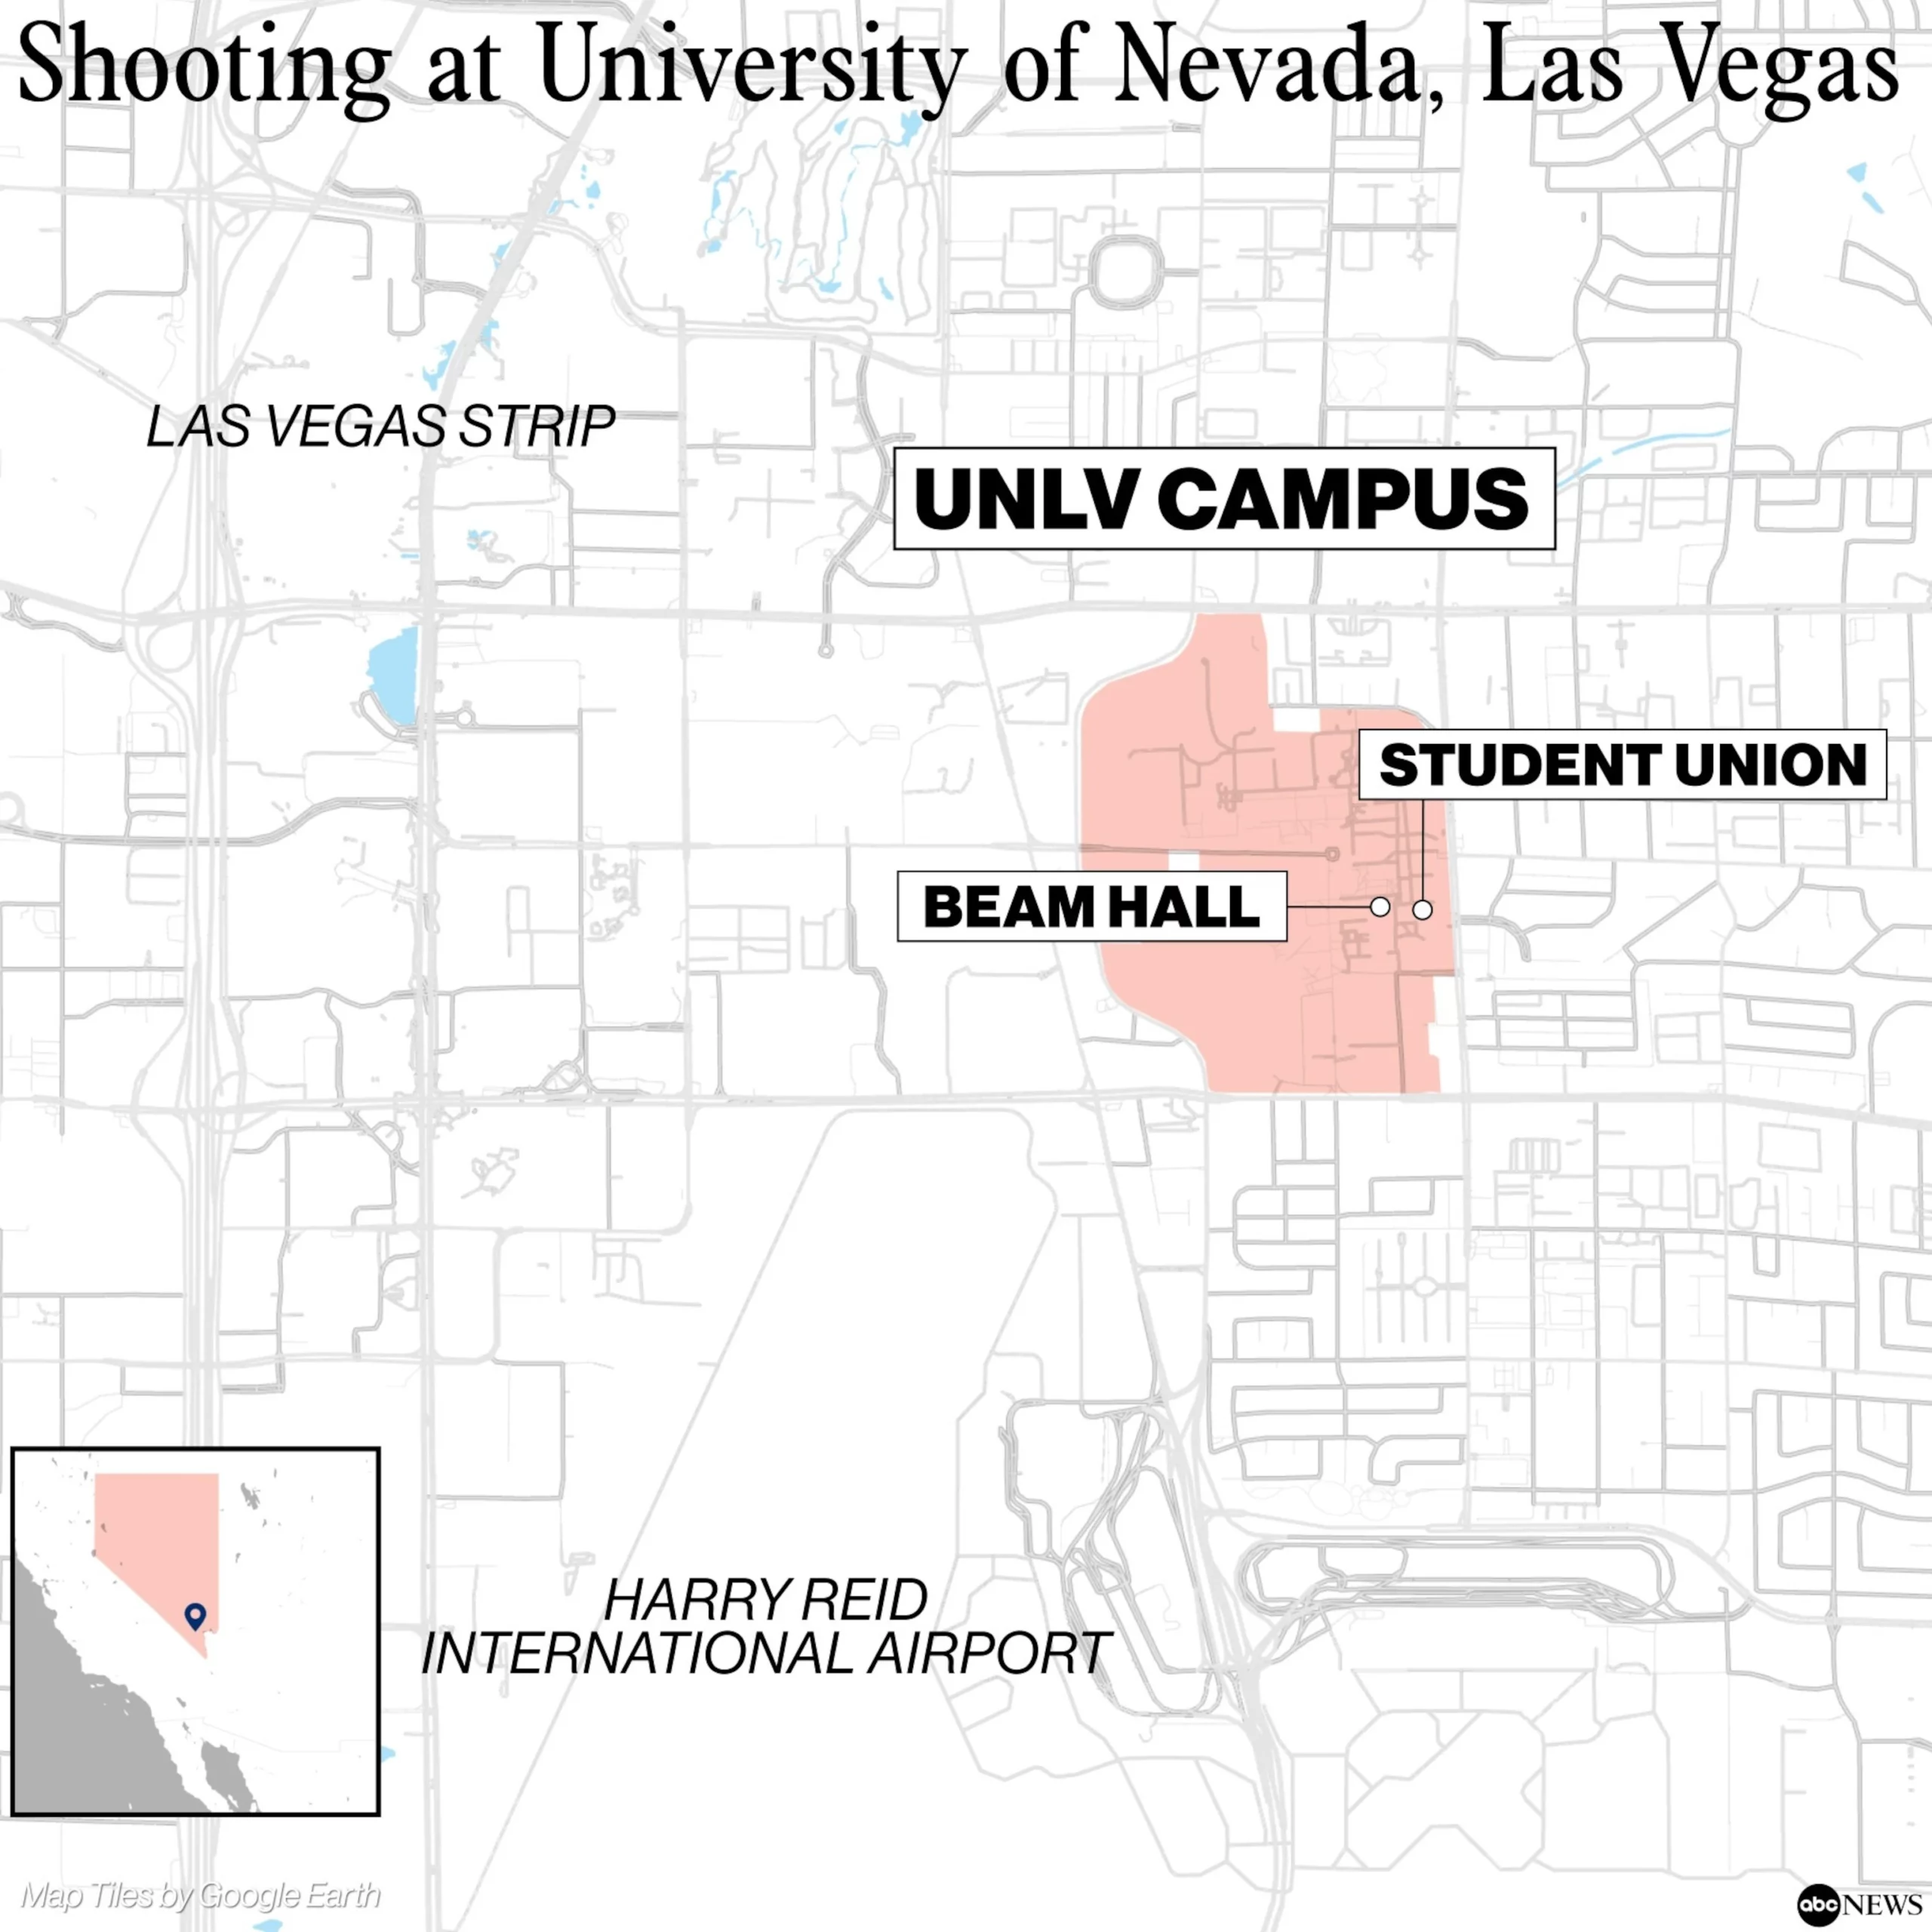 3 Killed In Unlv Shooting, Suspect Killed In Shootout With Campus Officers: Police